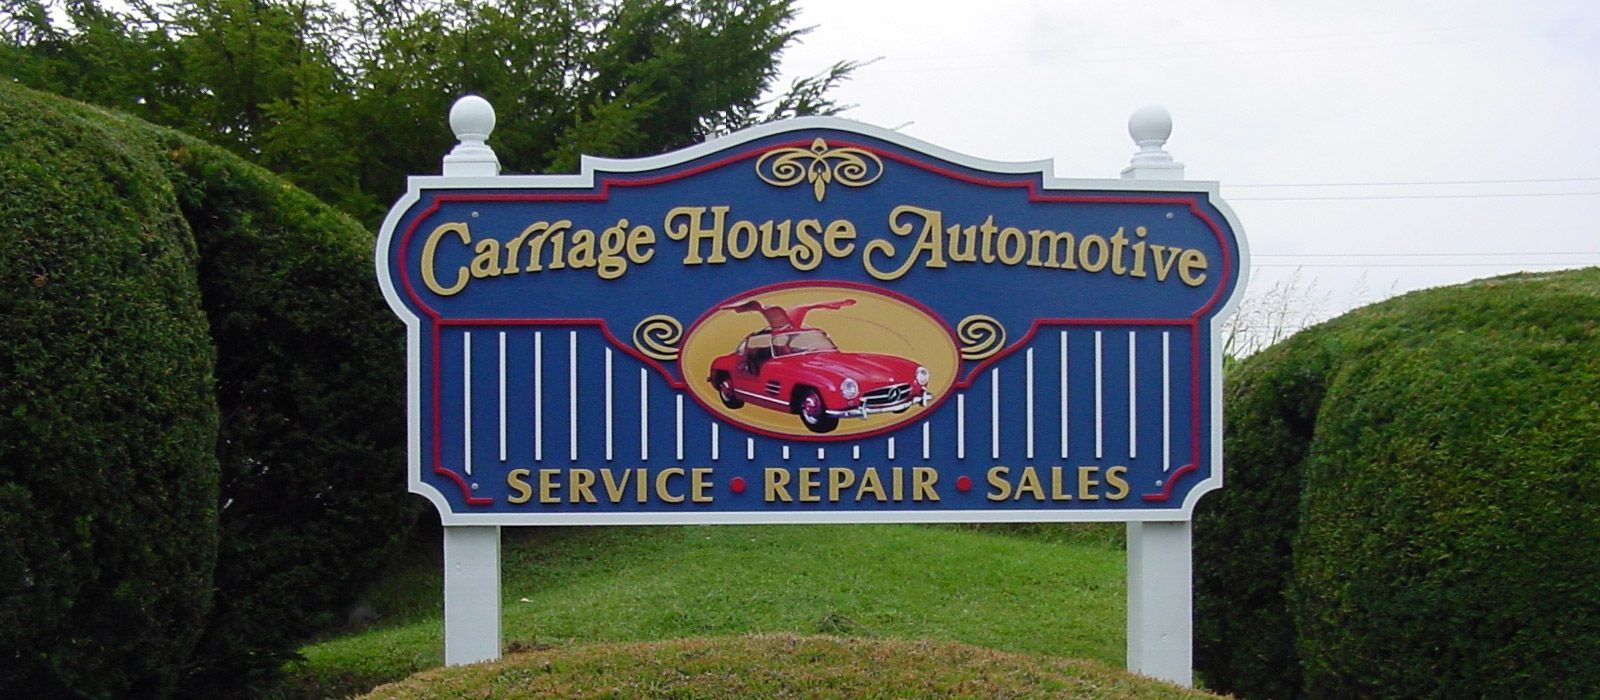 Carriage House Automotive Signeted - Frederick Auto Repair